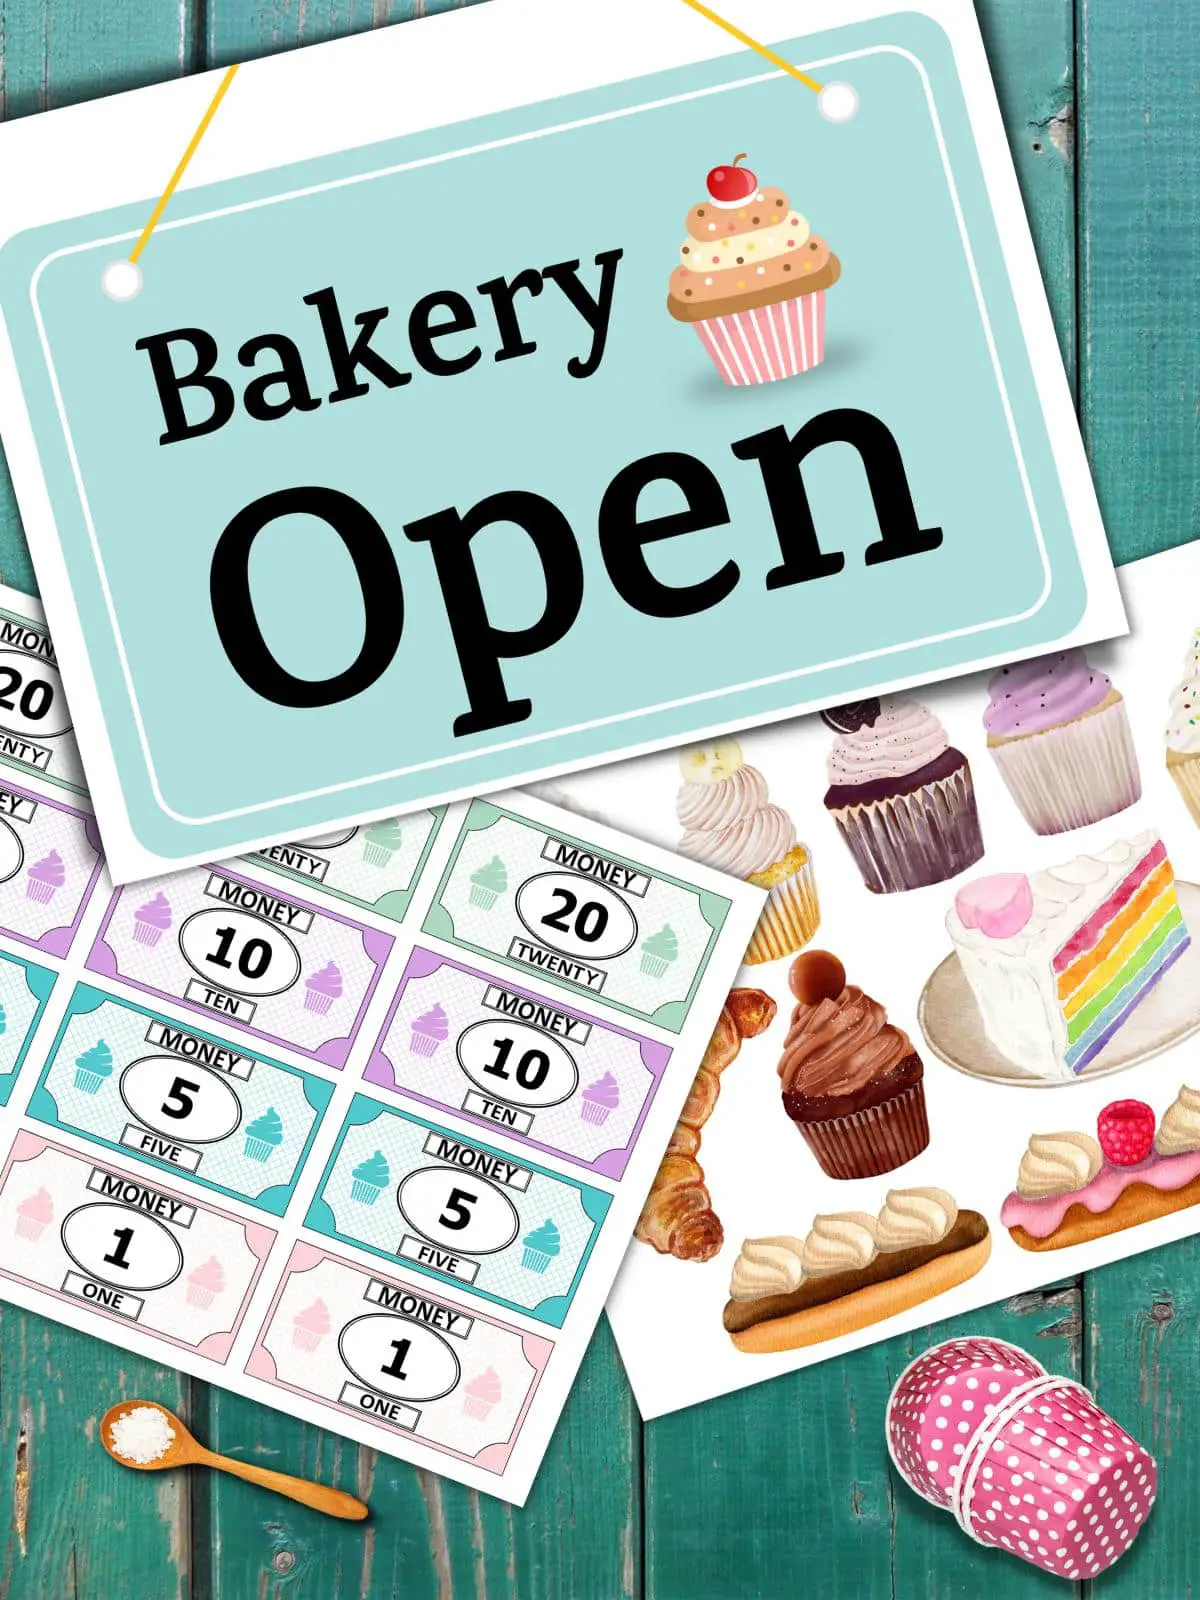 A table with printed bakery dramatic play pages including play money, desserts, and an open sign